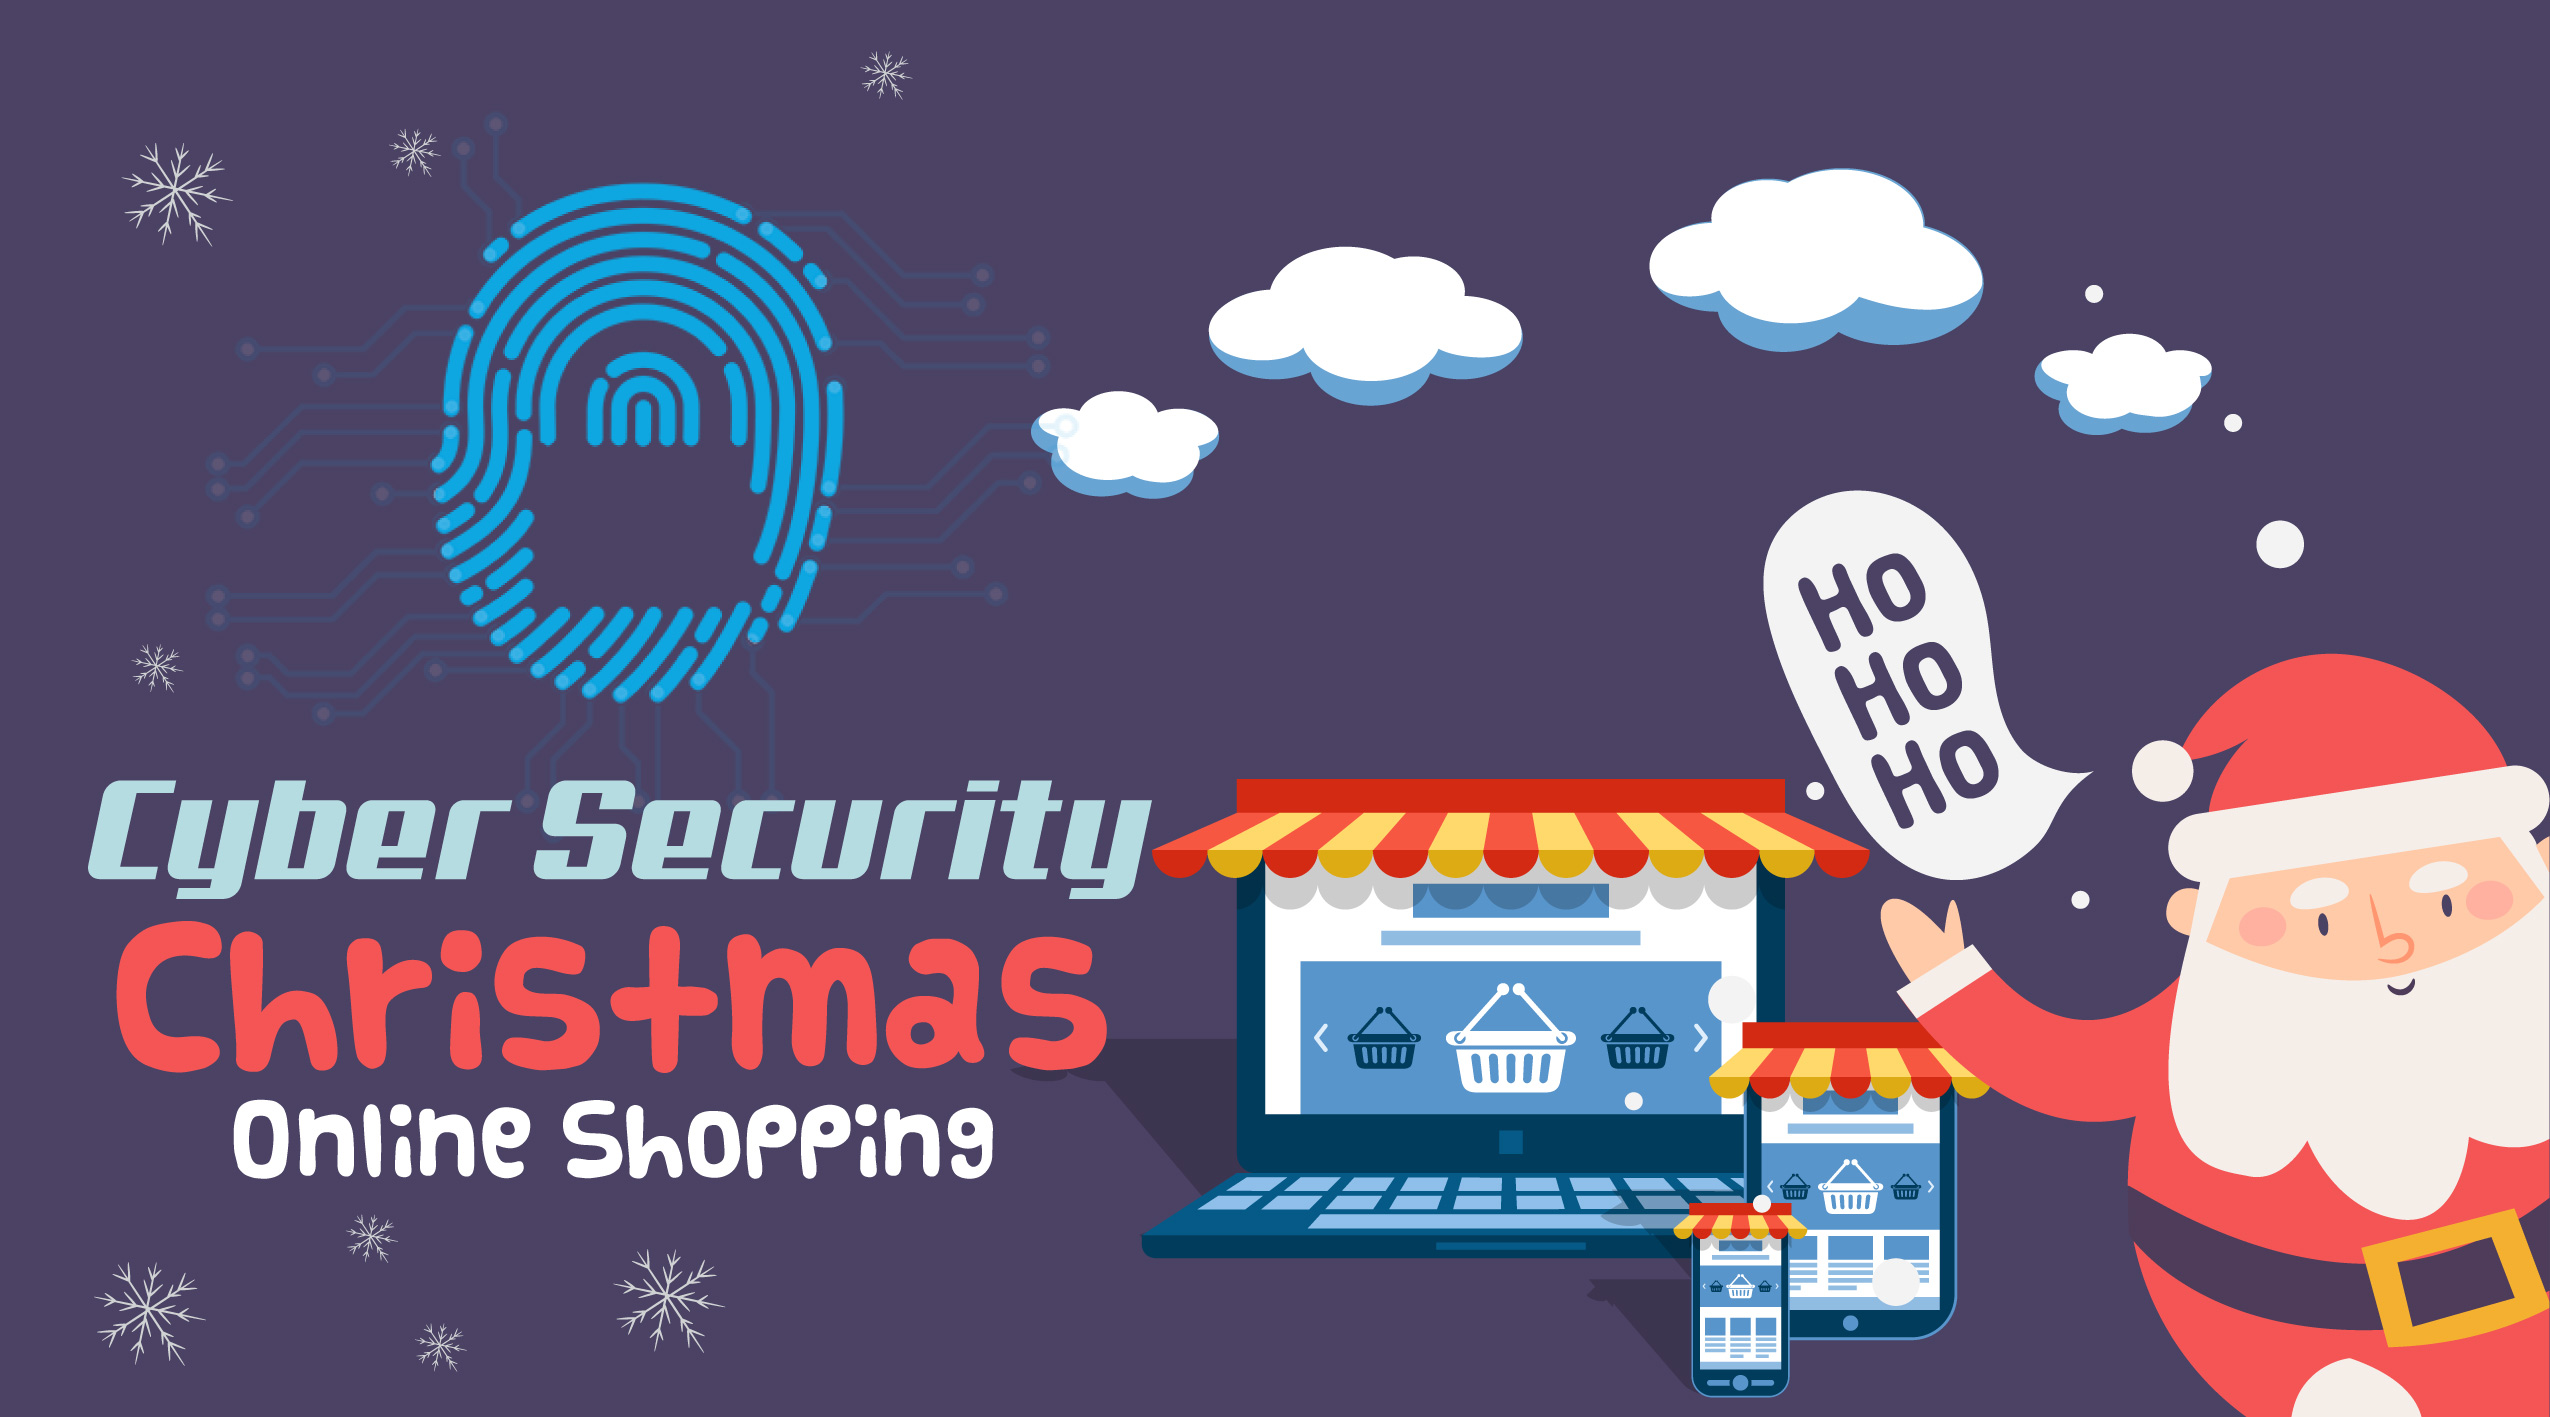 Cyber Security and Online Shopping